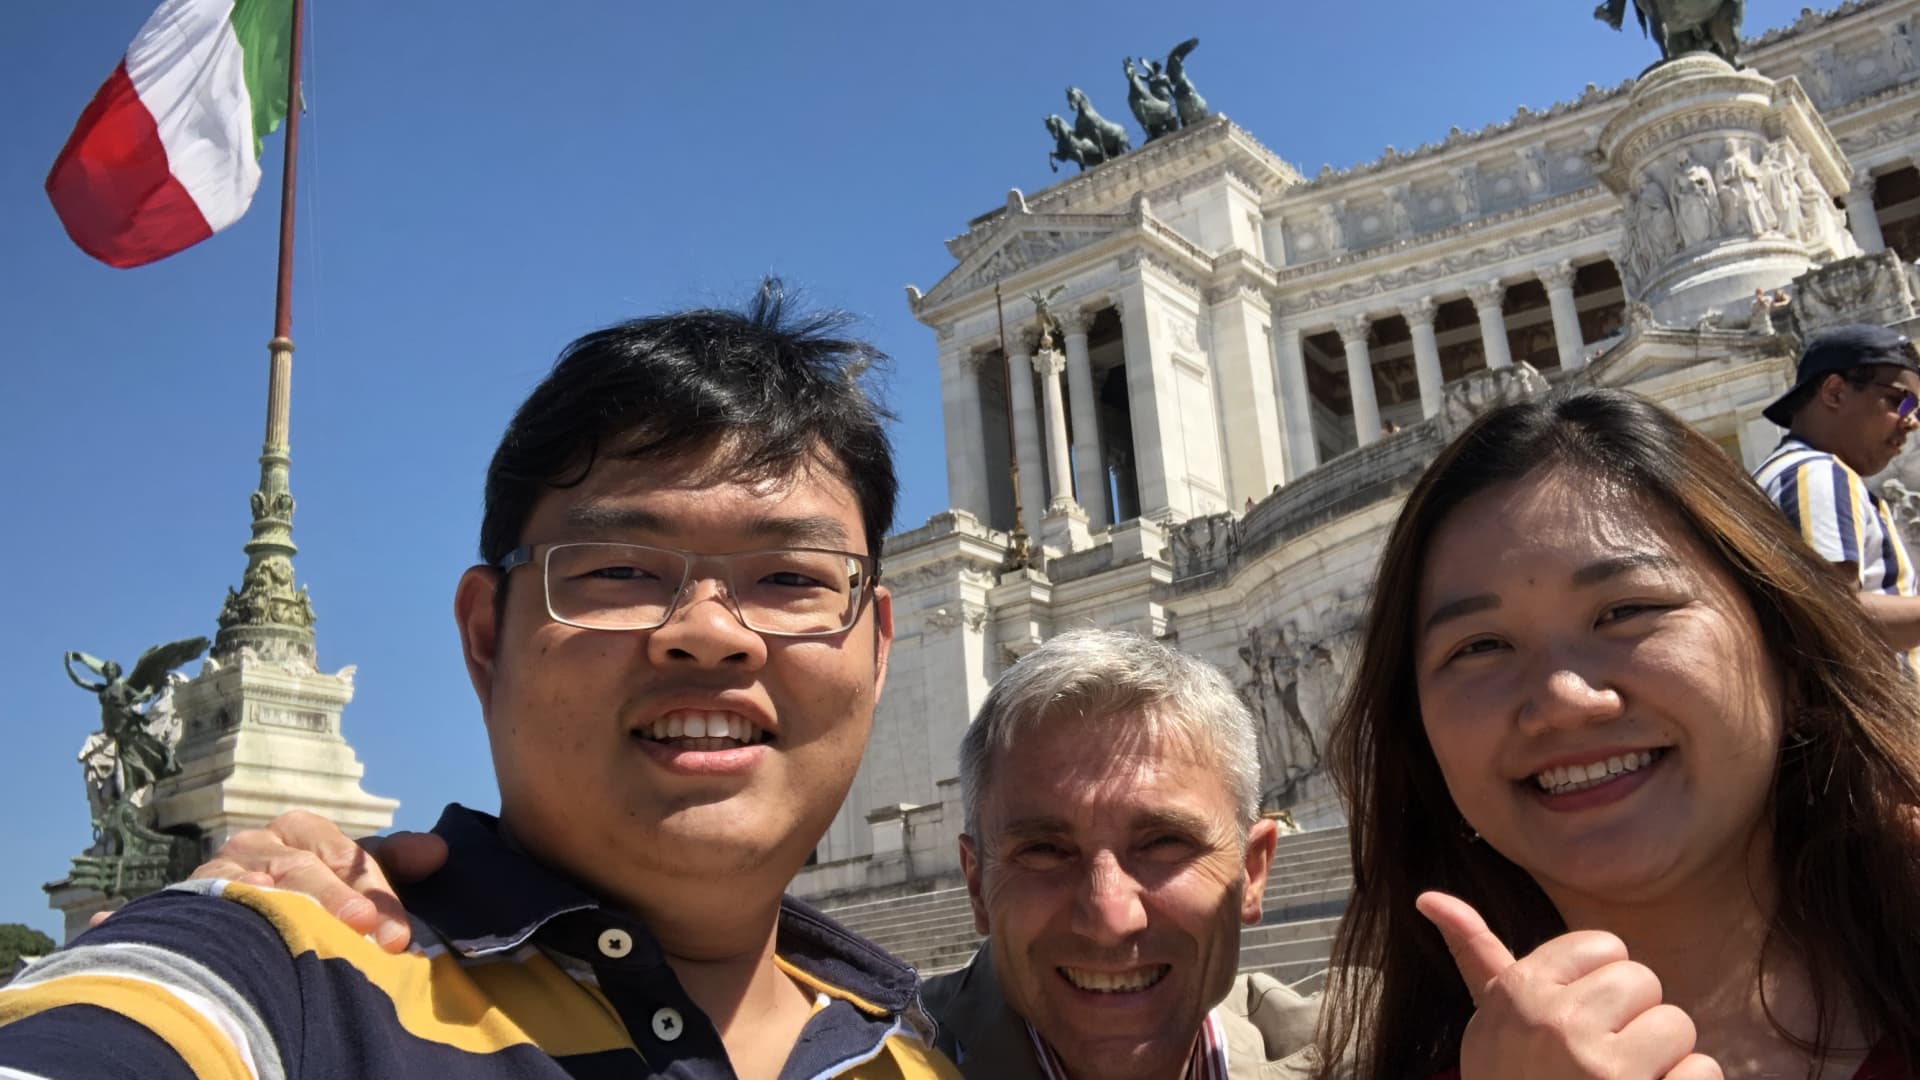 Giuseppe D'Angelo (center) shown here with travelers in front of the Victor Emmanuel II National Monument in Rome.